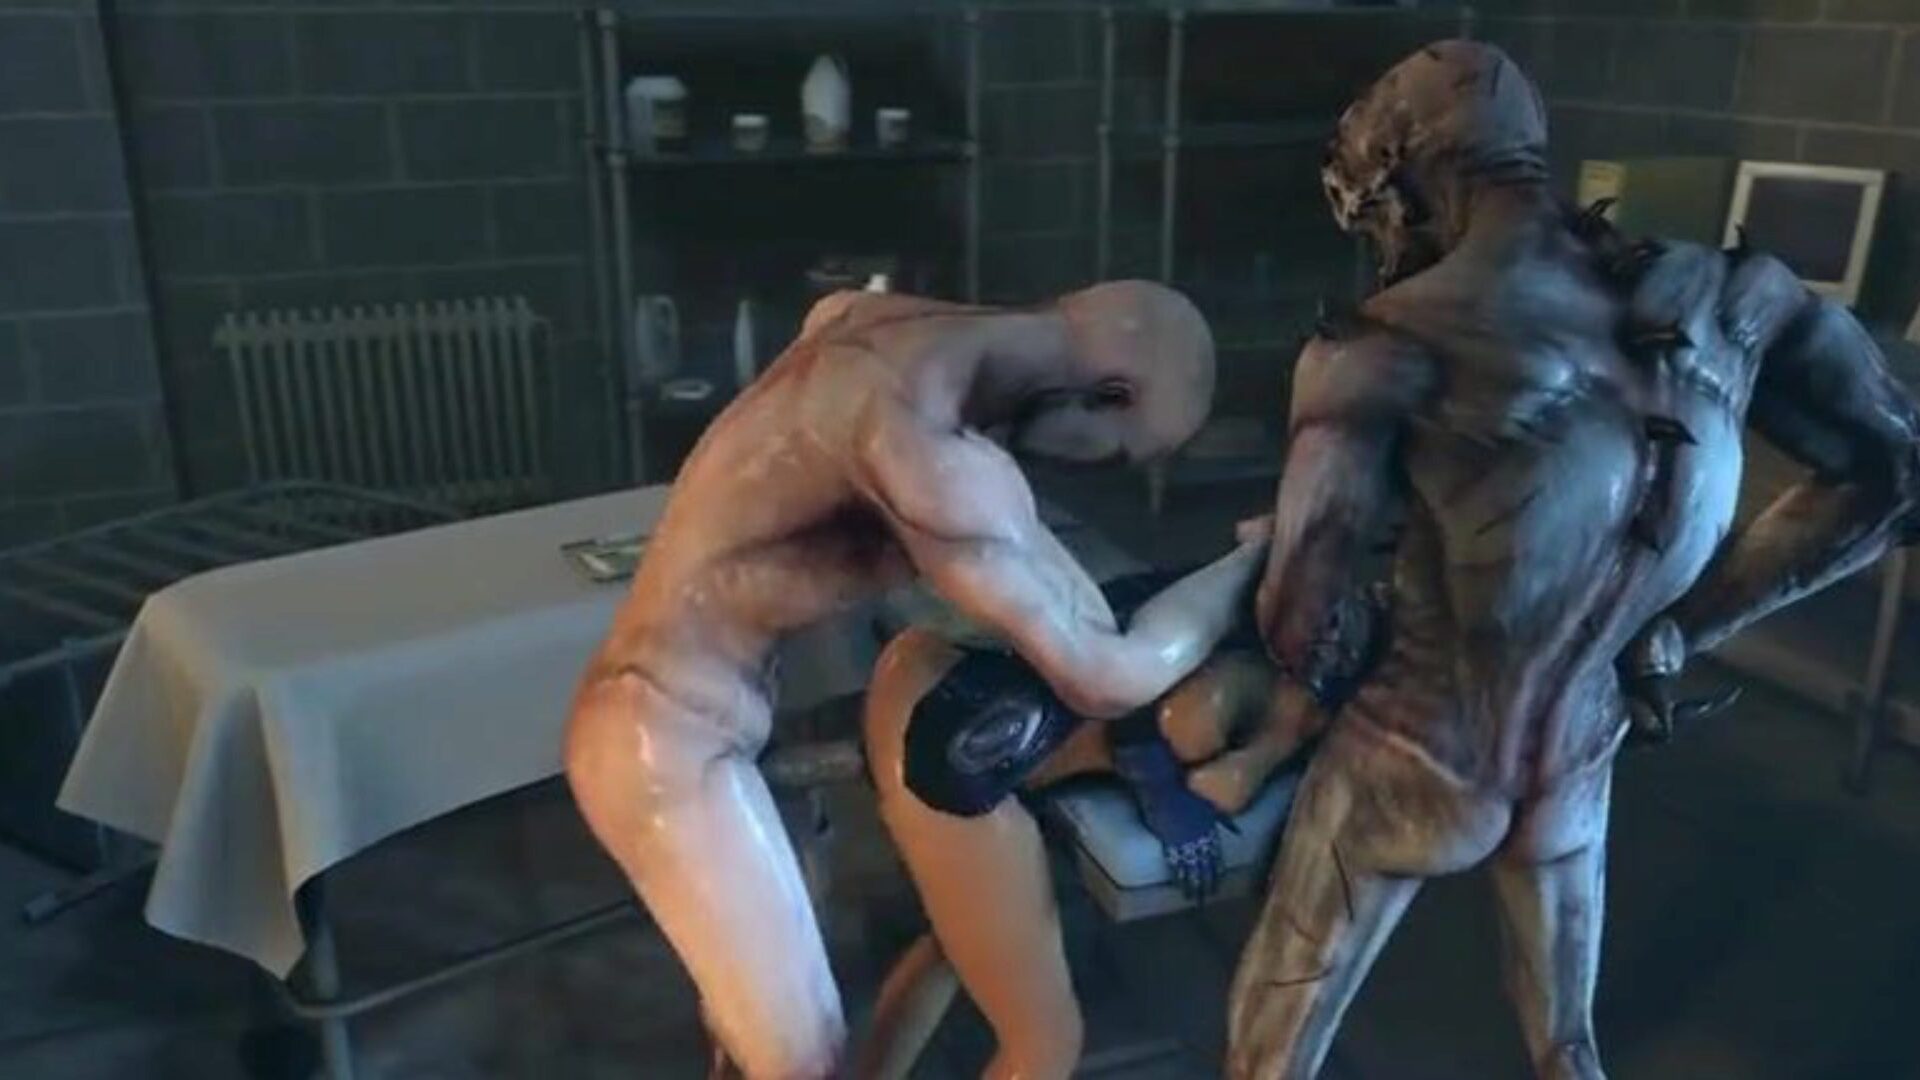 ashley and femshep getting banged by monsters hot